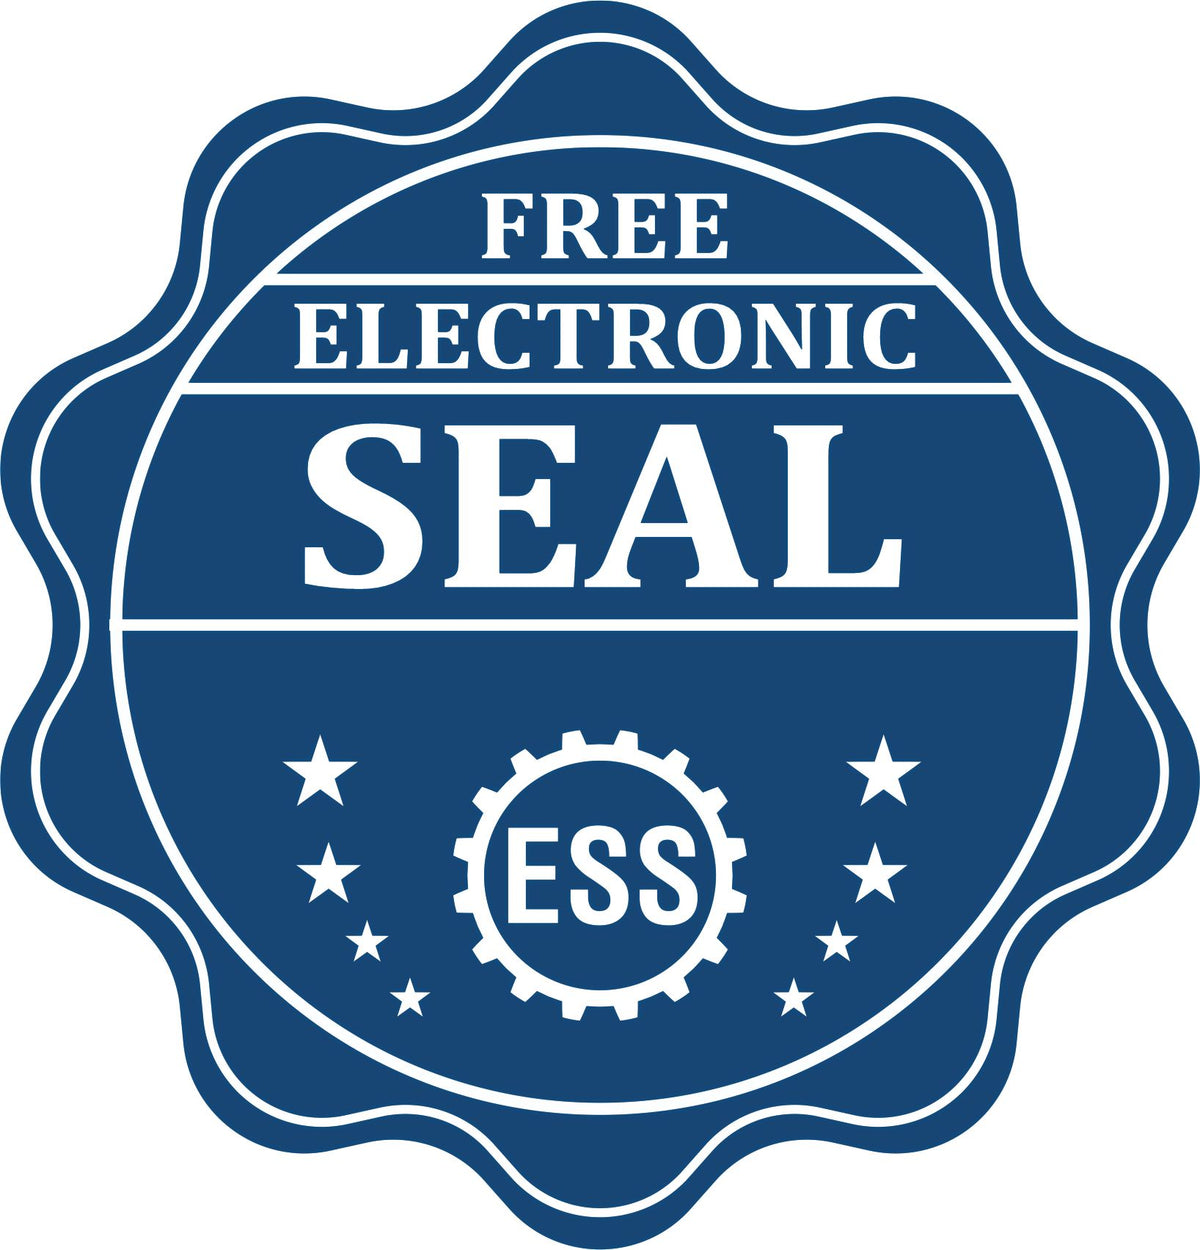 A badge showing a free electronic seal for the Slim Pre-Inked Alabama Professional Engineer Seal Stamp with stars and the ESS gear on the emblem.